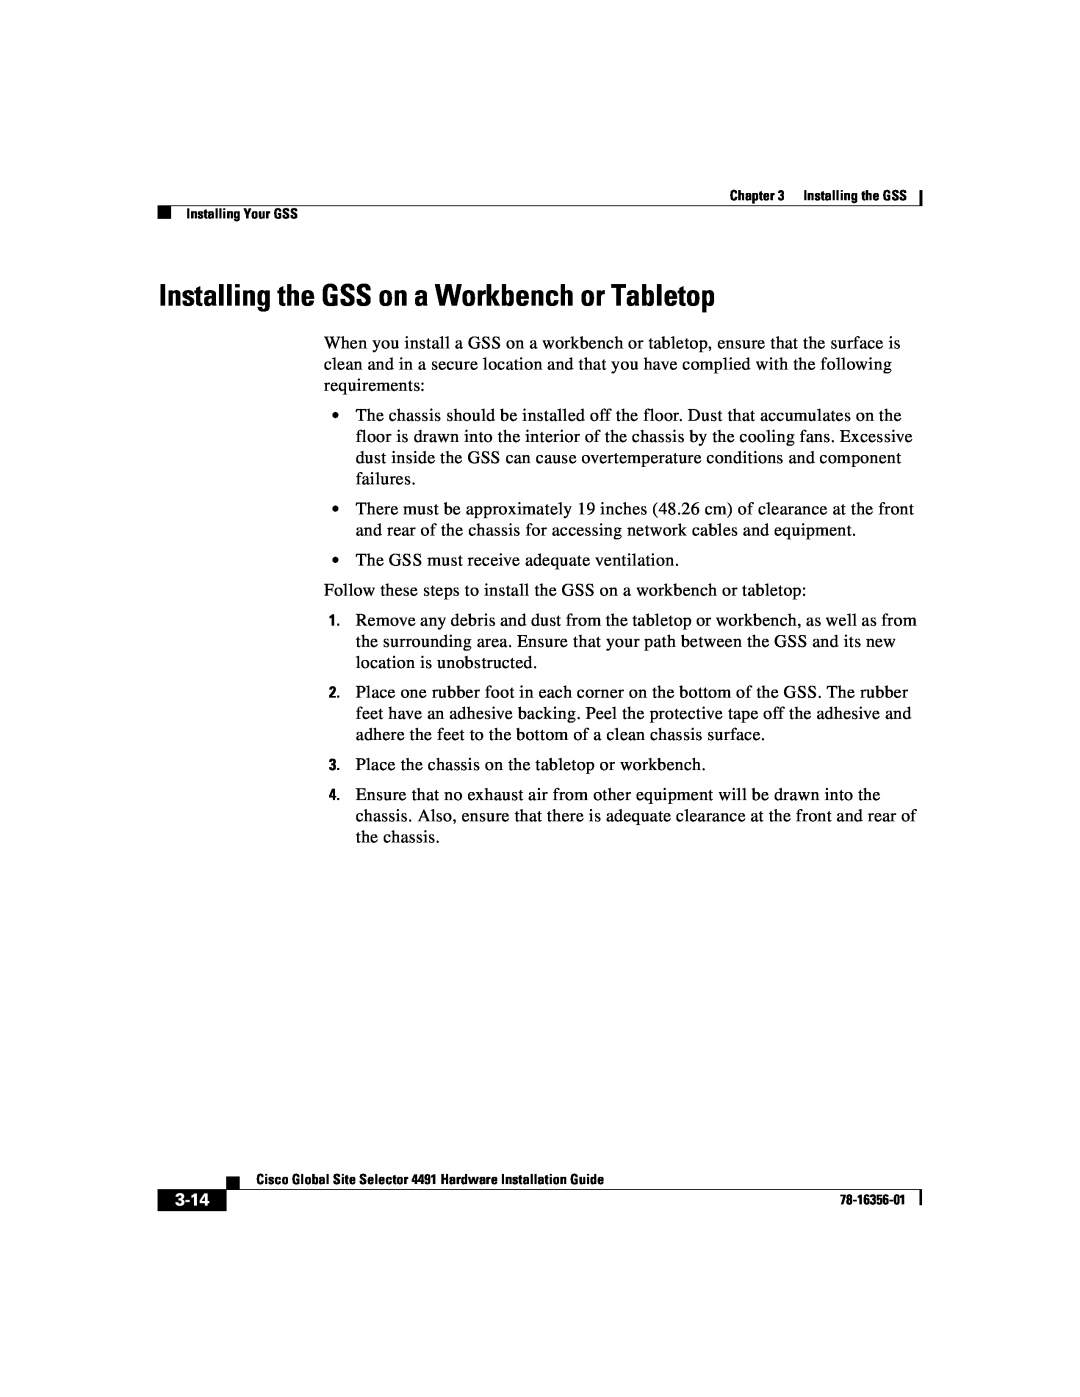 Cisco Systems 78-16356-01 manual Installing the GSS on a Workbench or Tabletop, 3-14 